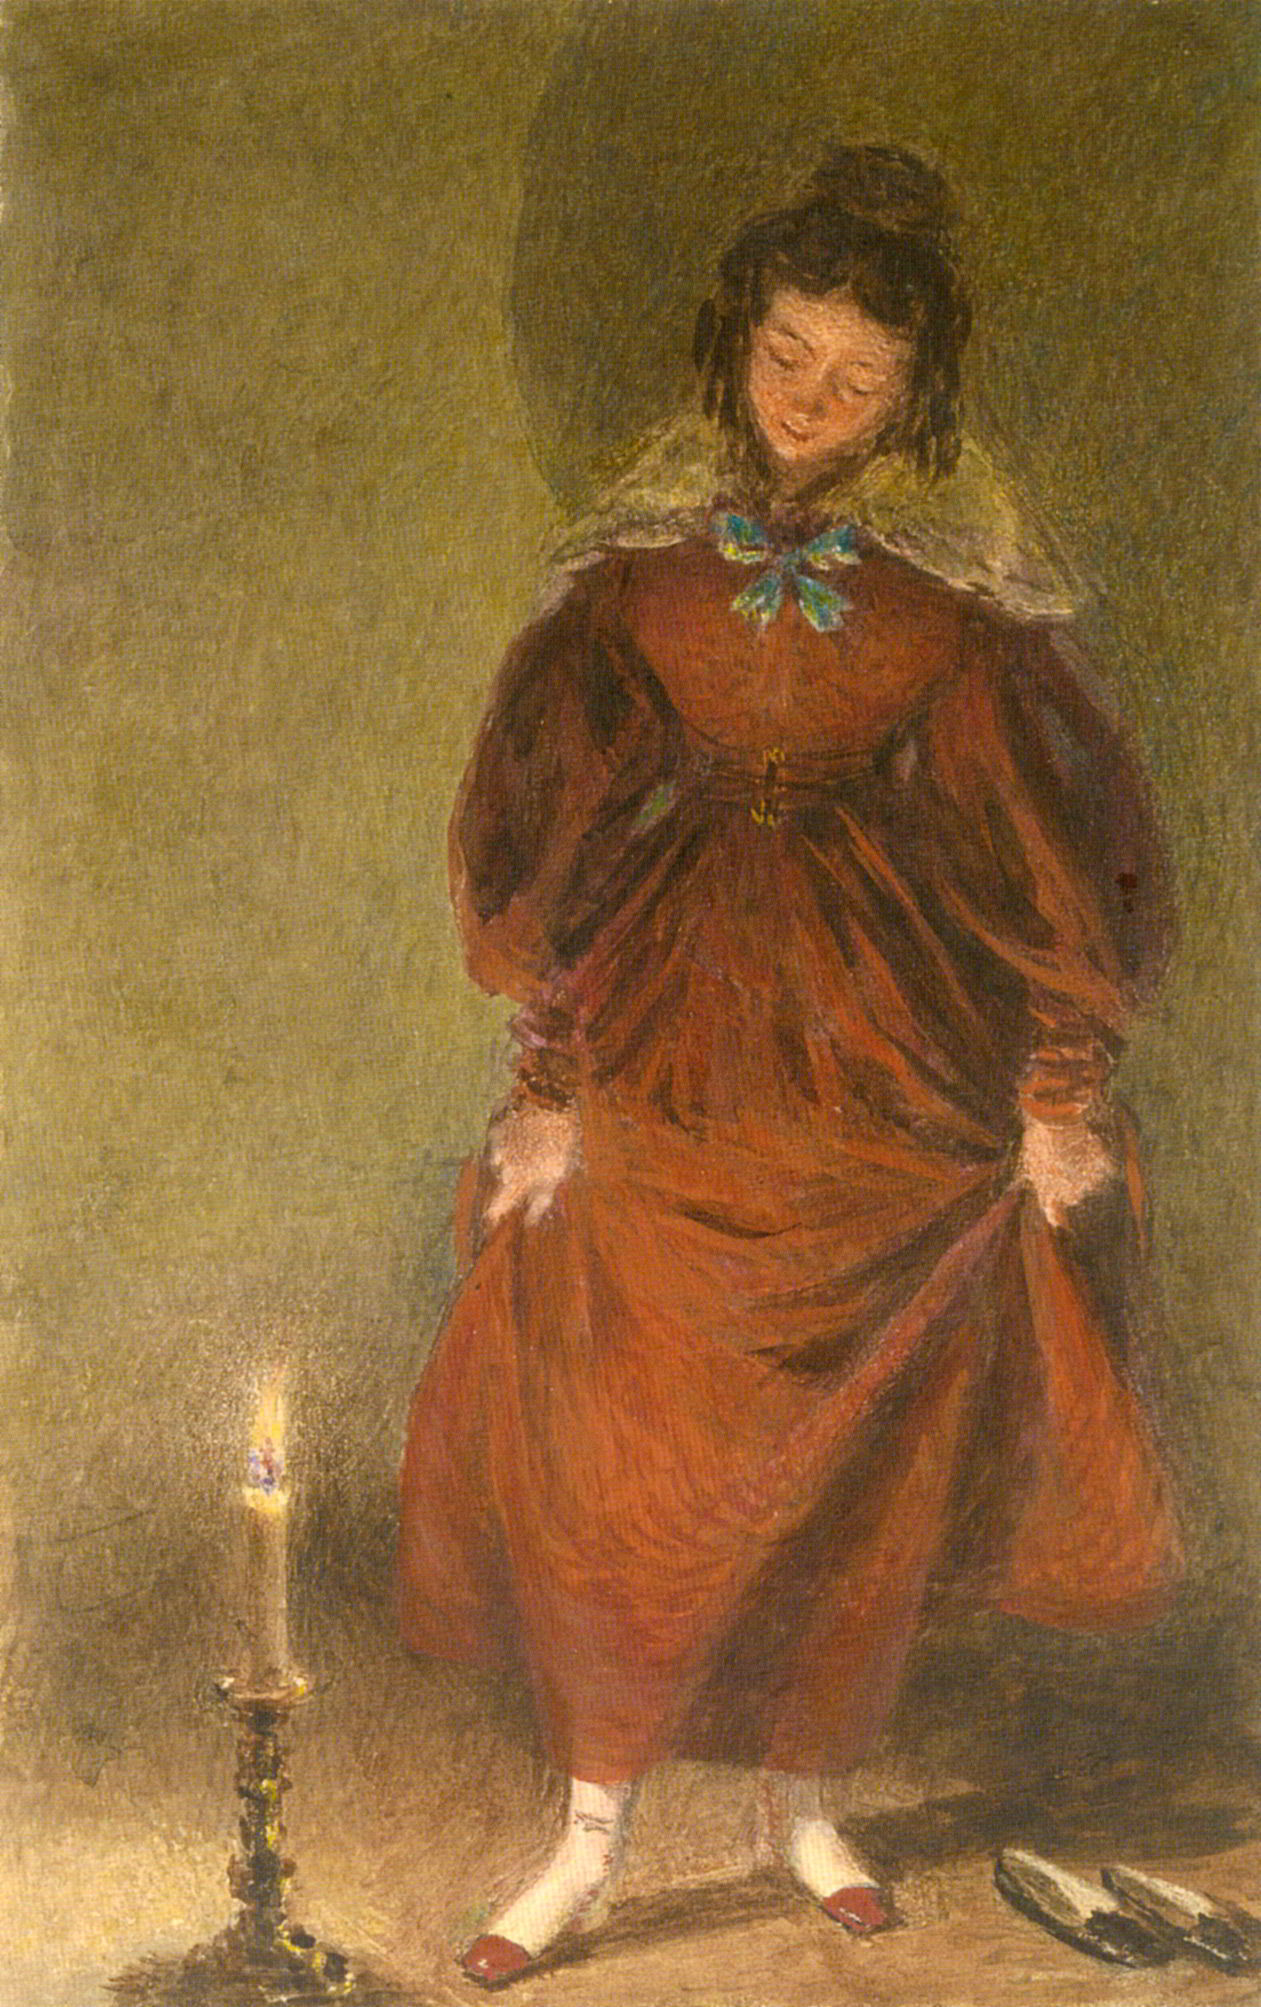 New Red Shoes, the artist's wife by William Henry Hunt